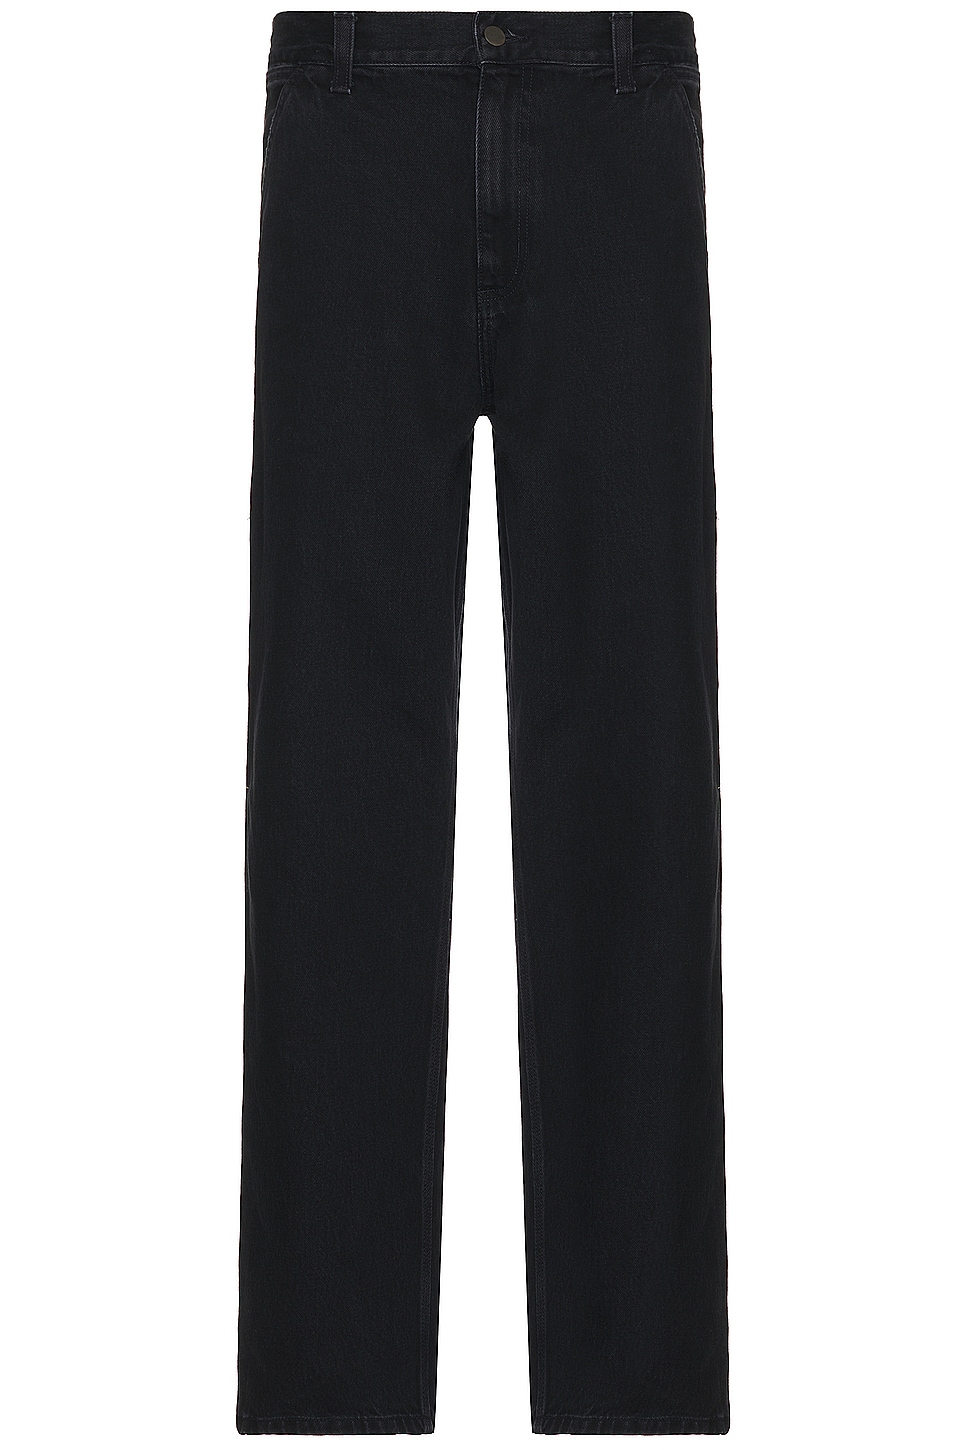 Image 1 of Carhartt WIP Single Knee Pant in Black Stone Washed